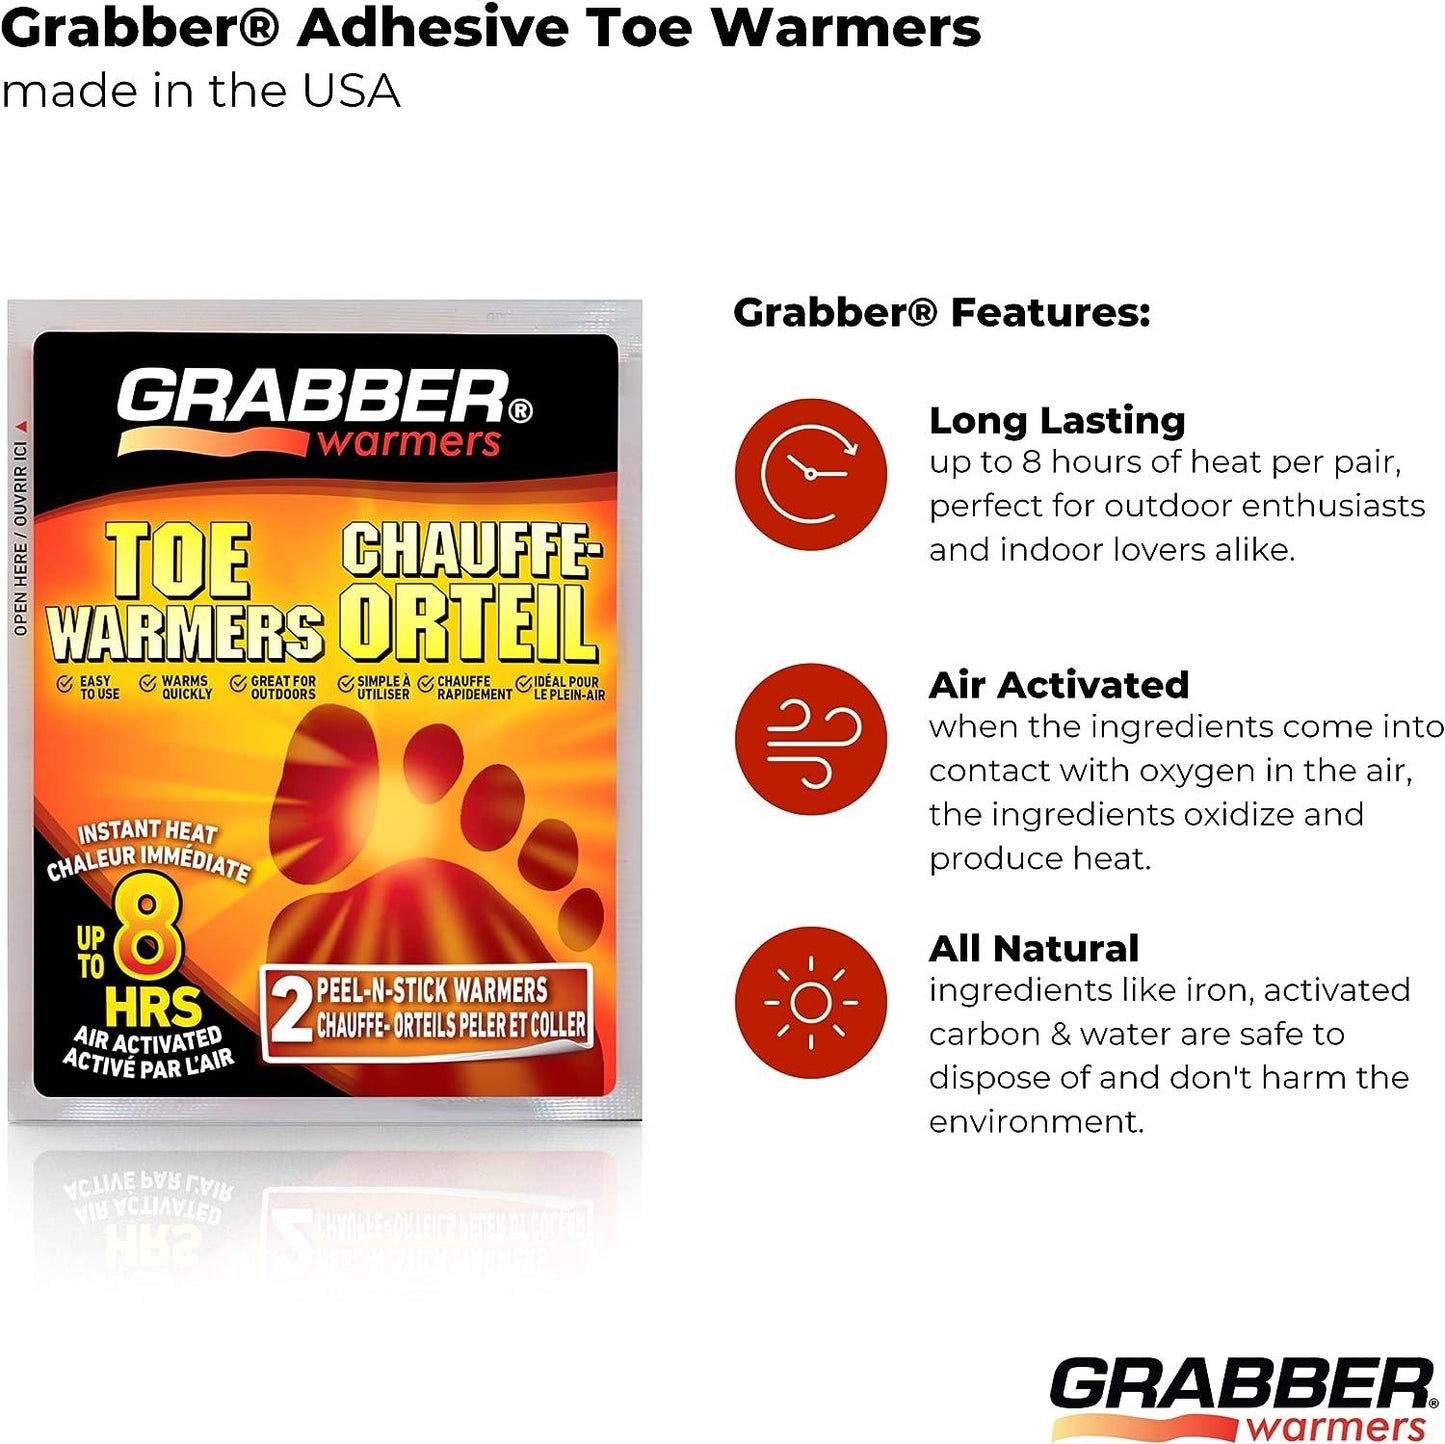 Grabber Toe Warmers - Long Lasting Safe Natural Odorless Air Activated Warmers - Up to 8 Hours of Heat - 8 Pair Pack